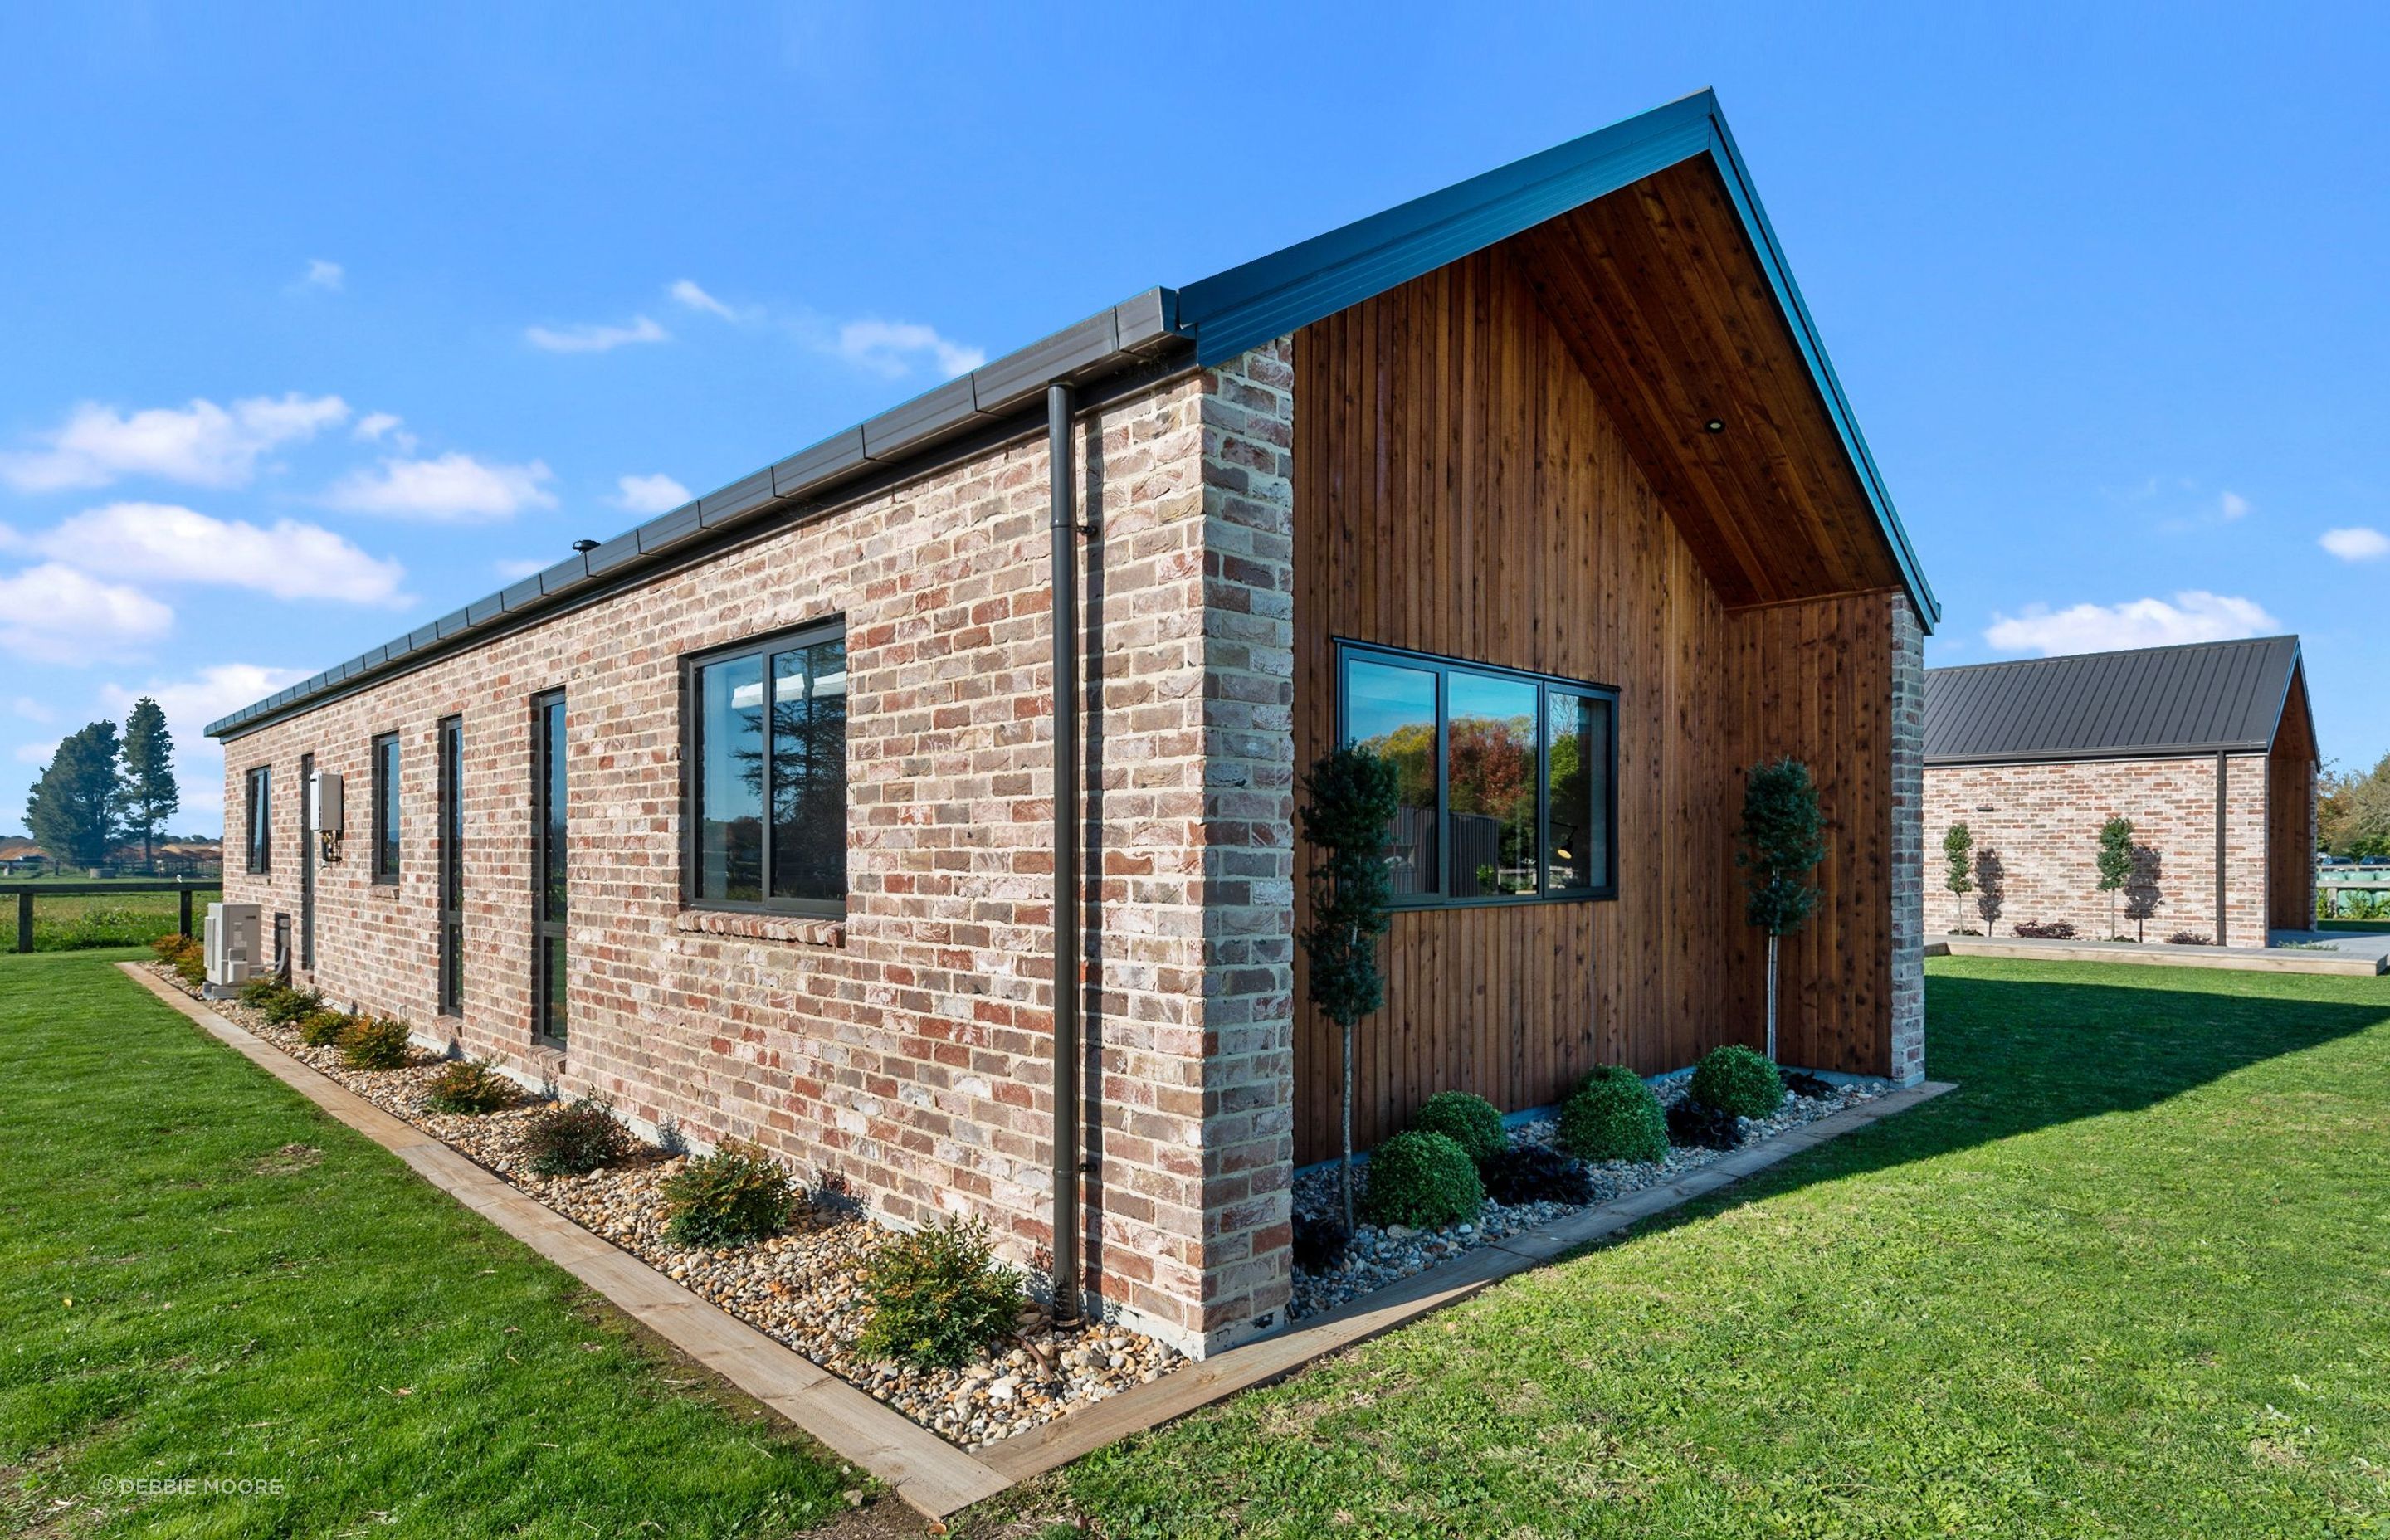 The Austral bricks from The Brickery are manufactured to look aged, a look that references reclaimed bricks from the Christchurch earthquakes that are no longer easy to find. The extended walls at the gable end provided room for extra planting.